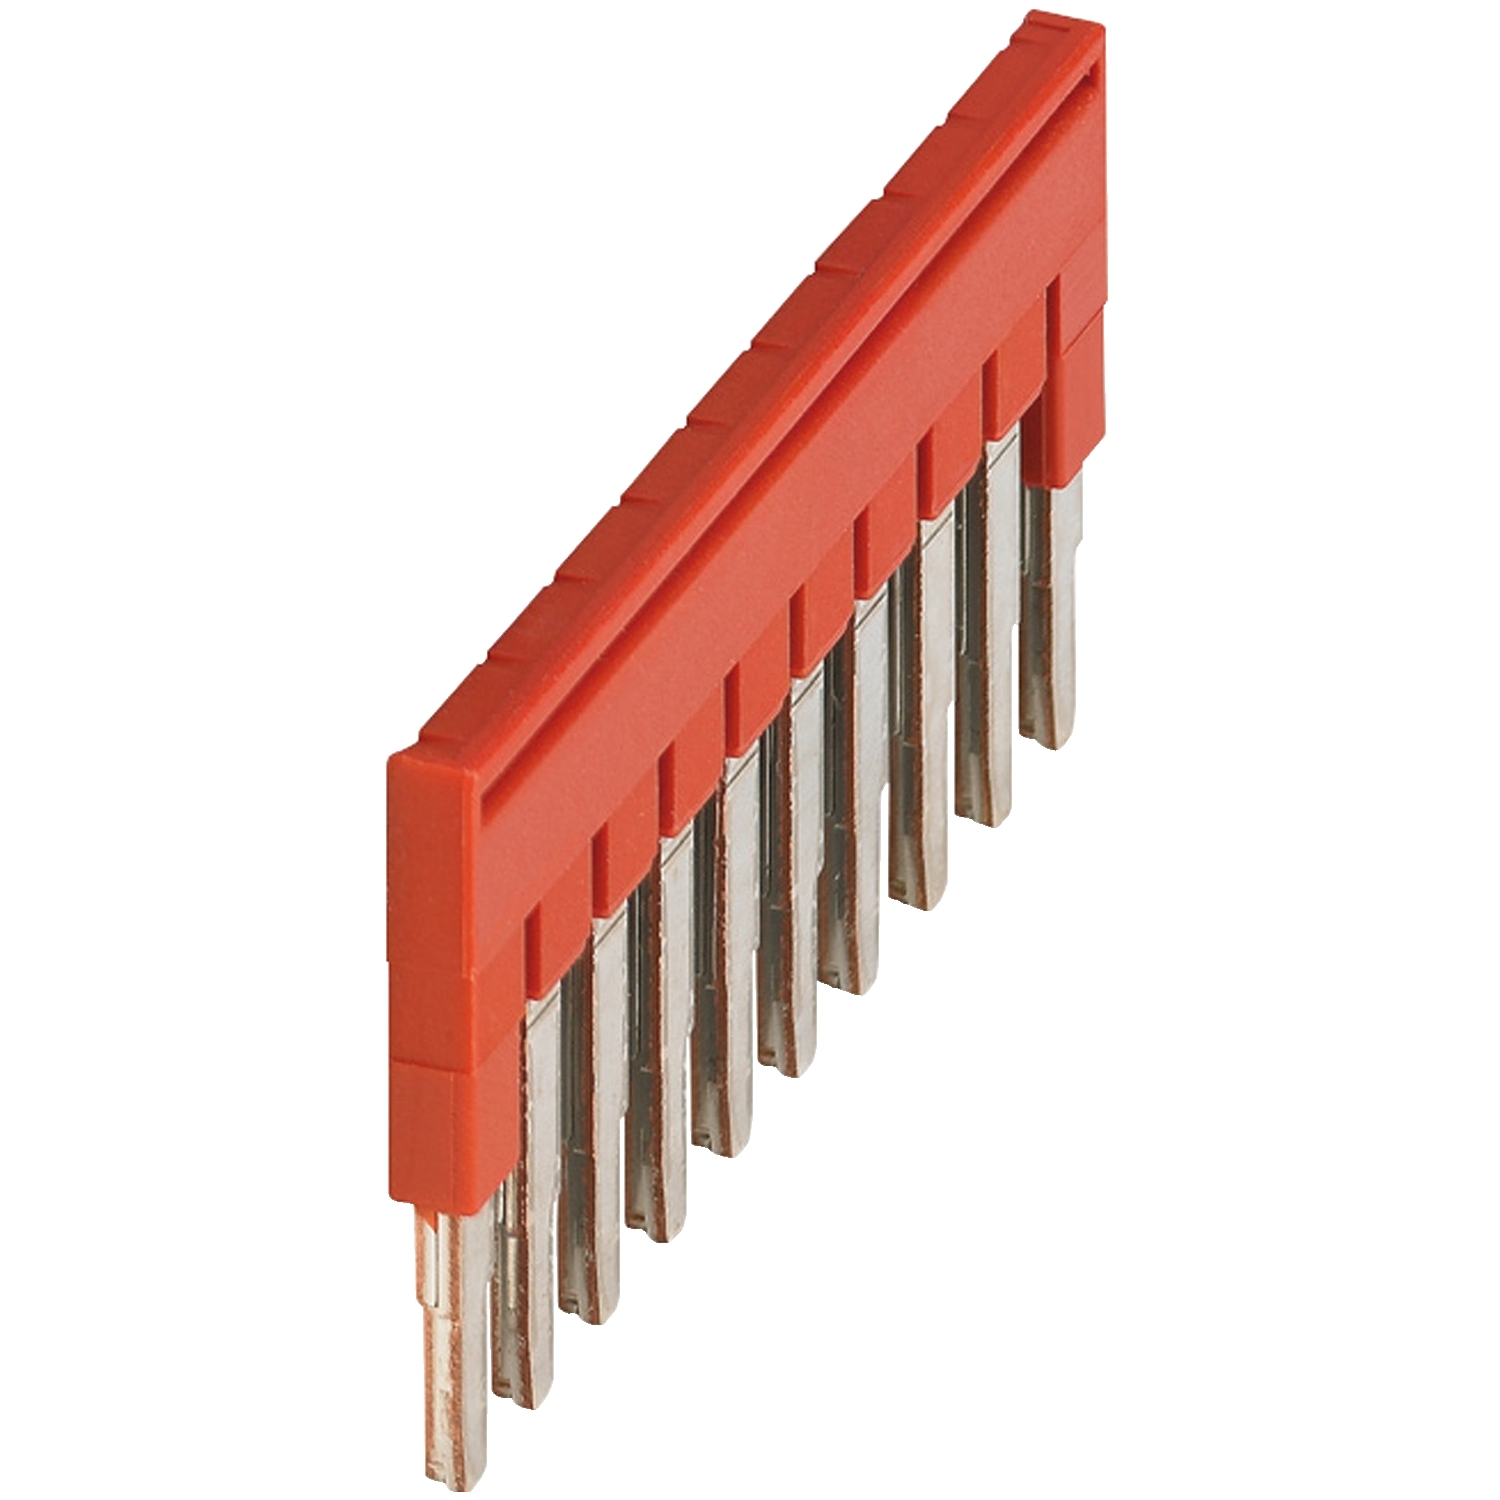 Plug-in bridge, Linergy TR, 10 points, for 2.5mm² terminal blocks, red, 10 way, set of 10